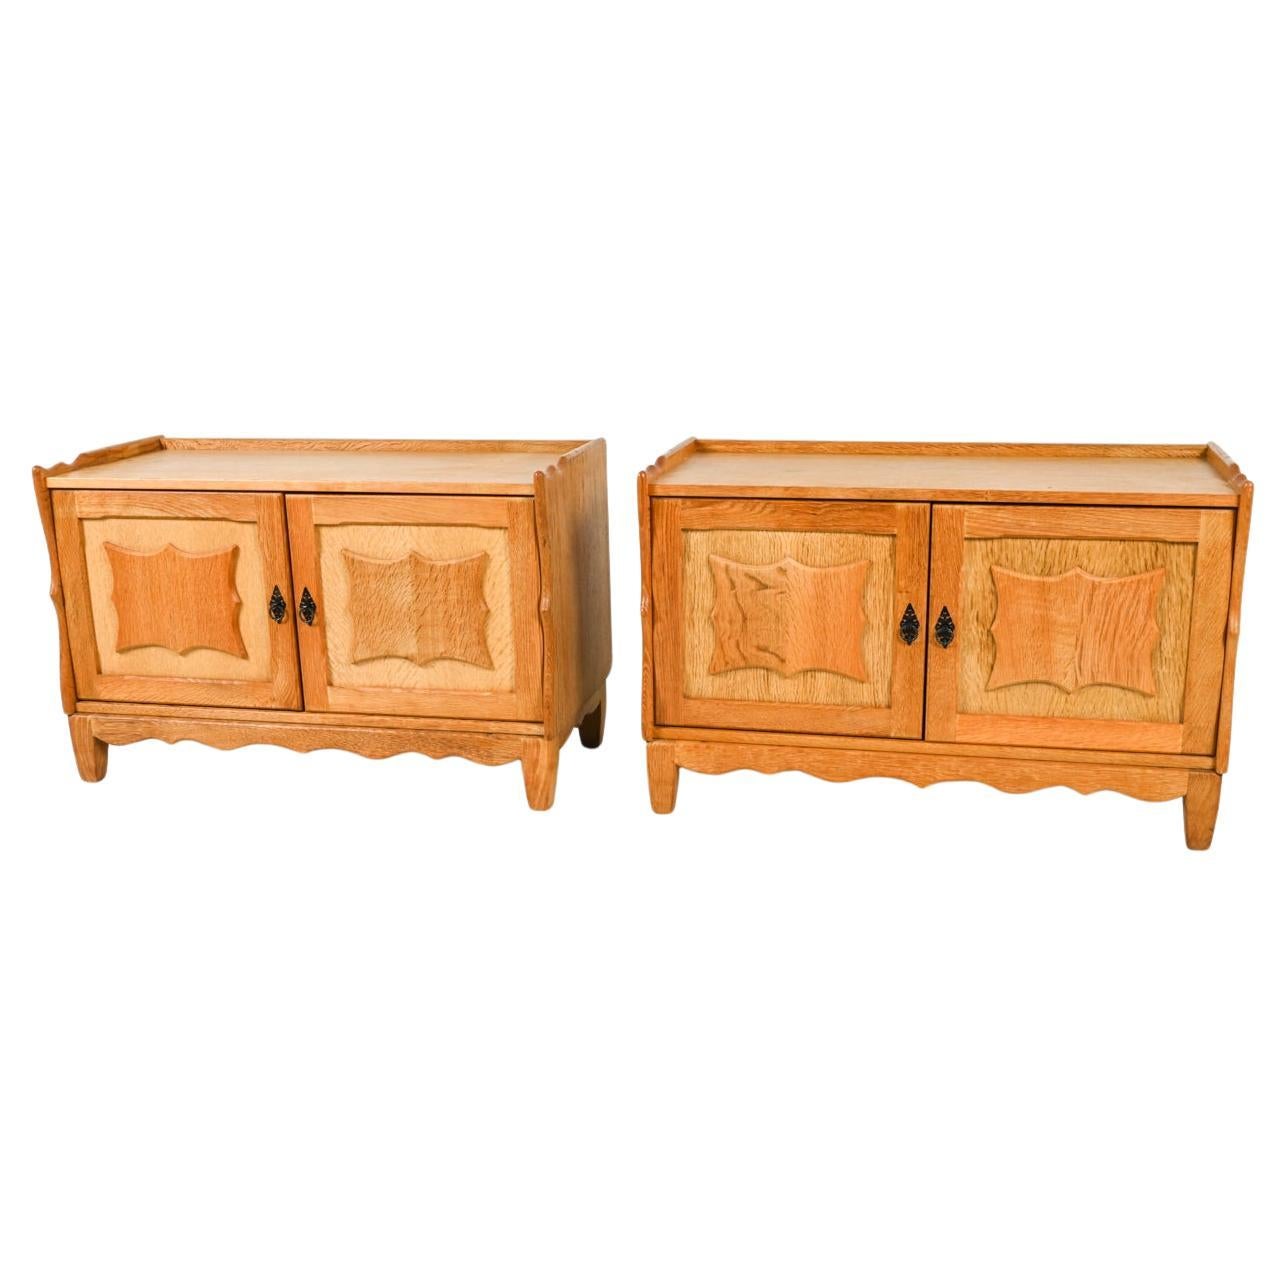 Pair Of Low Oak Cabinets Attributed To Henry 'Henning' Kjaernulf, Circa 1970's